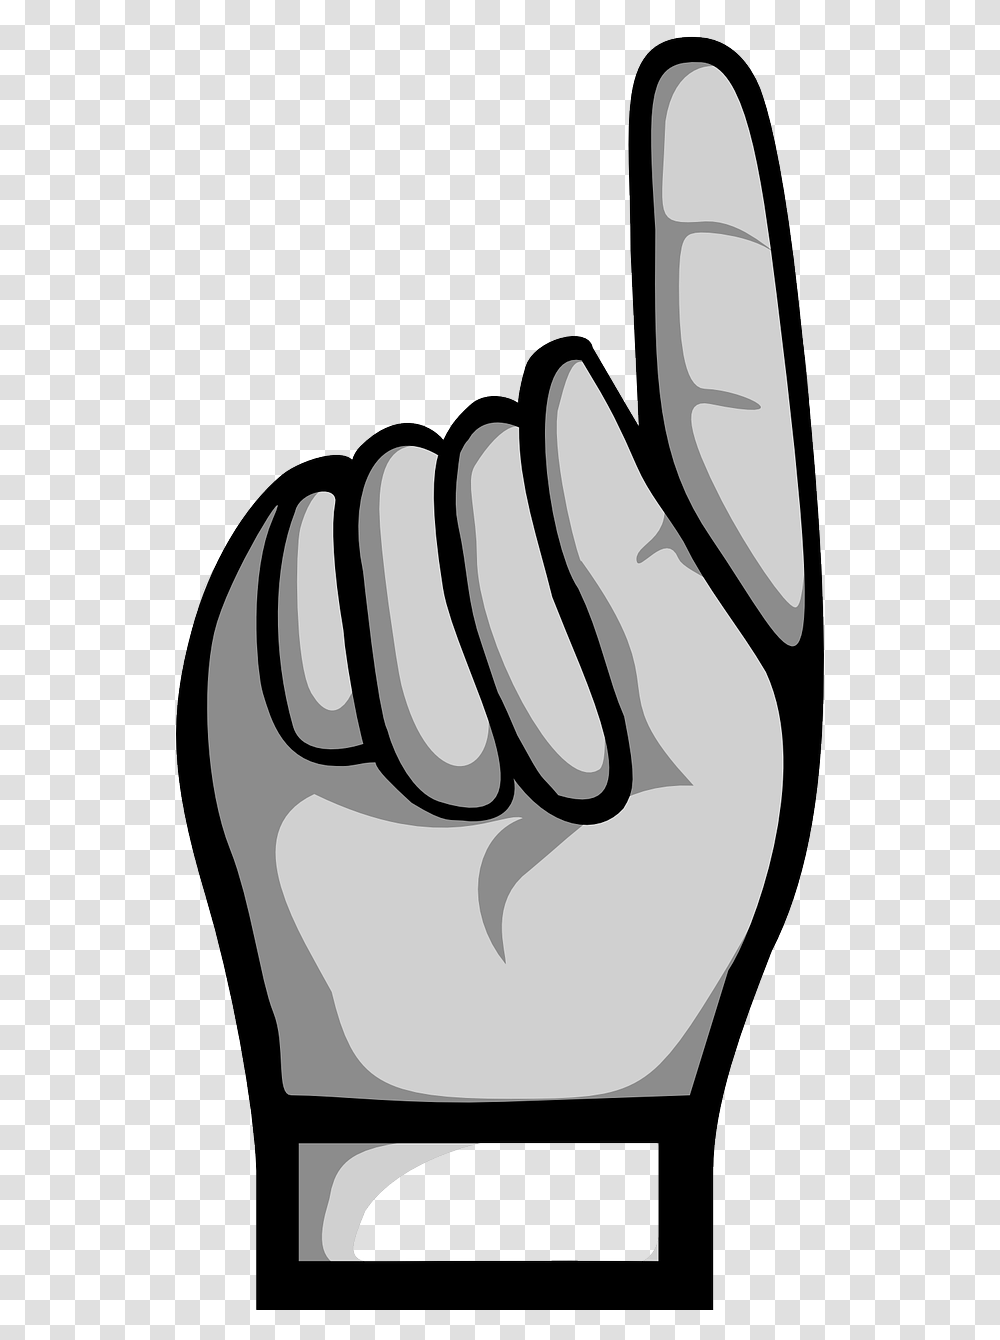 Hand Pointing Hand Pointing Up Clipart, Fist Transparent Png